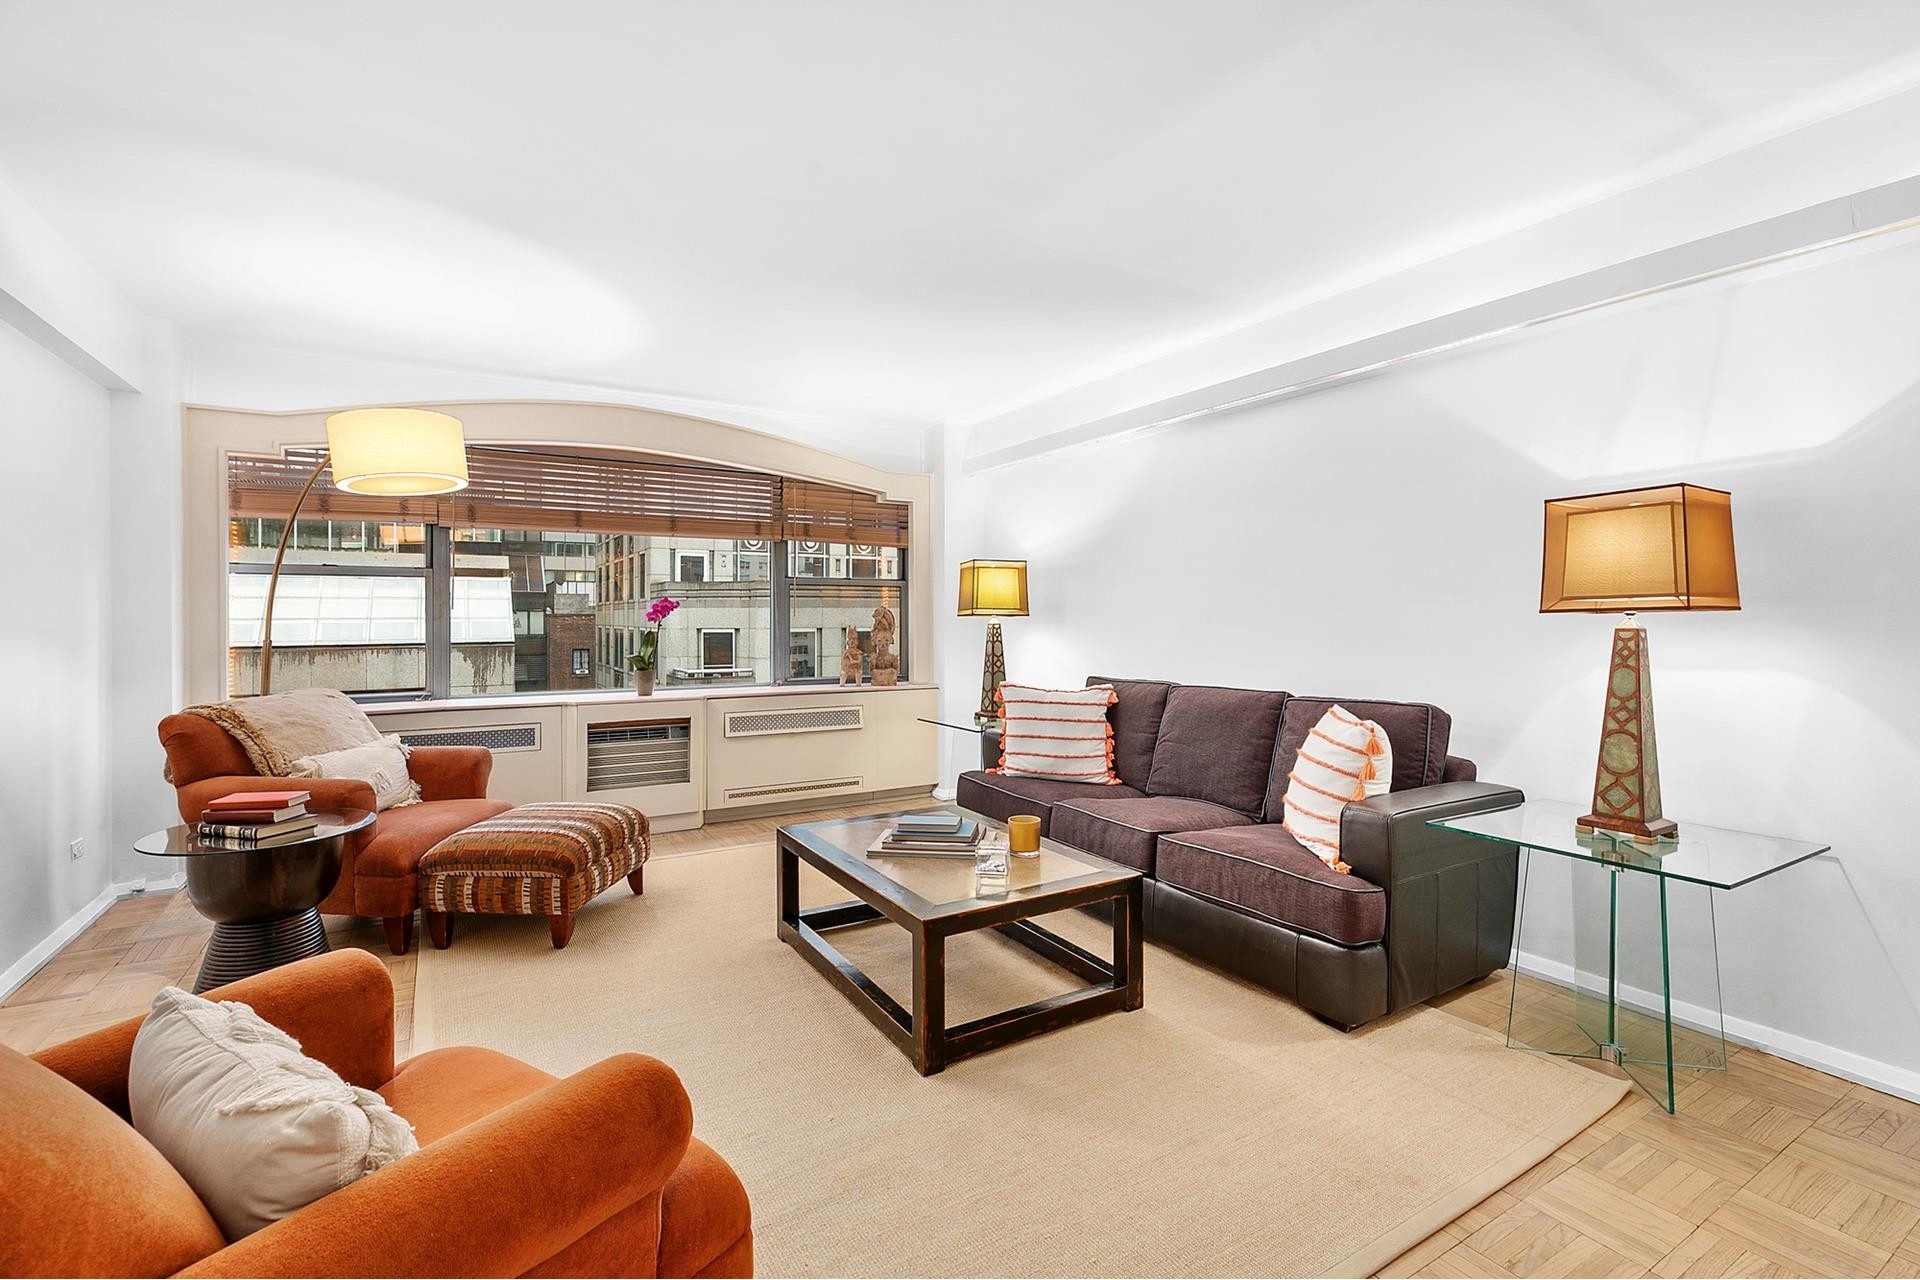 Co-op Properties for Sale at The Dorchester, 110 E 57TH ST, 9E Midtown East, New York, New York 10022